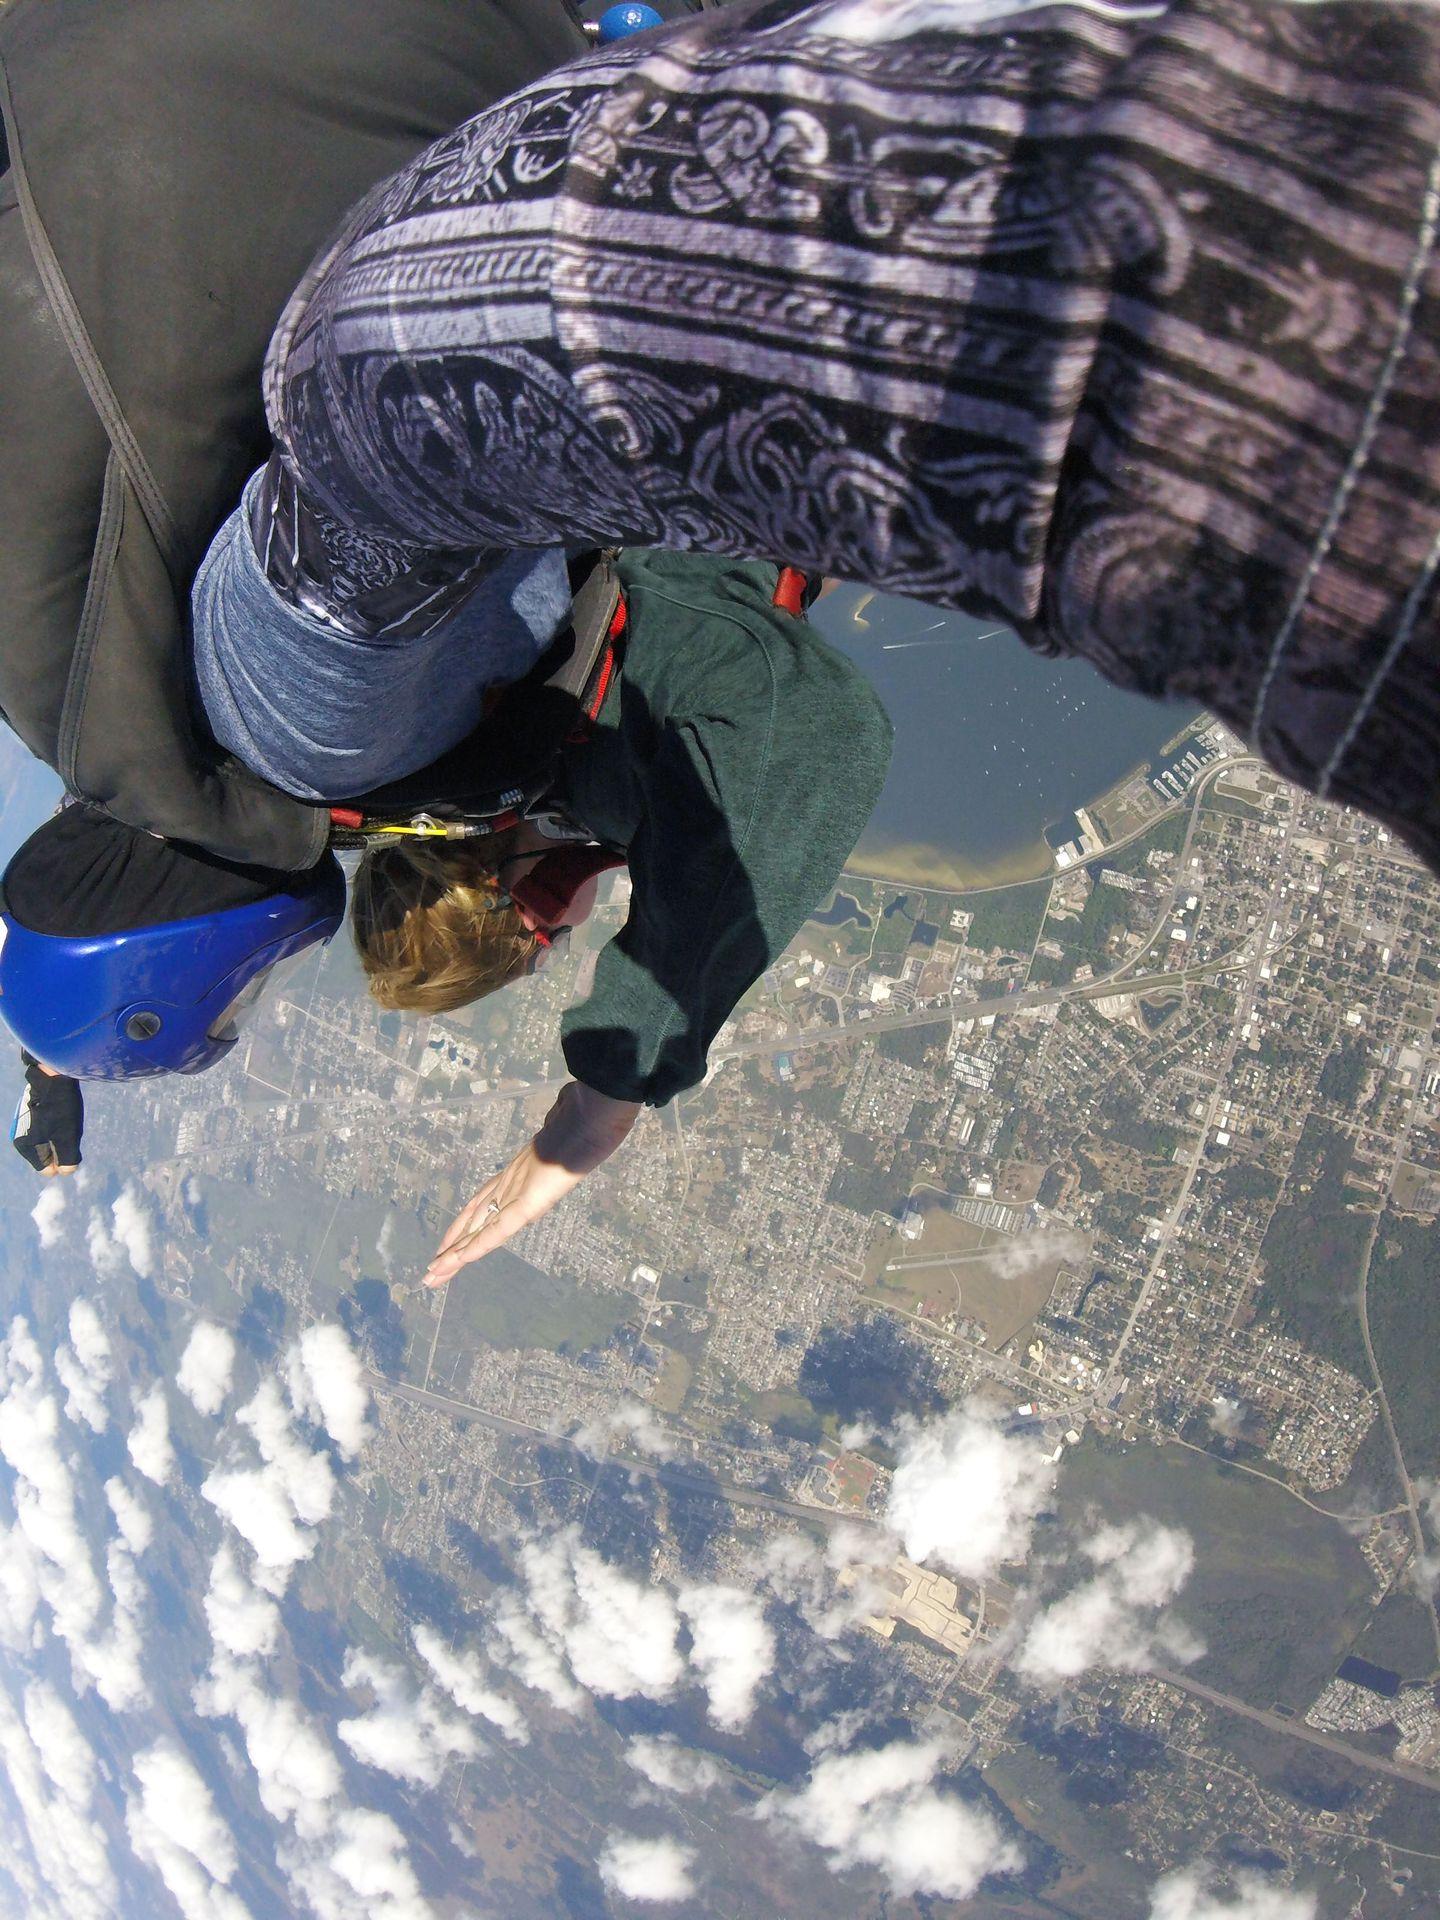 A photo of Lydia skydiving. There are clouds and land below.